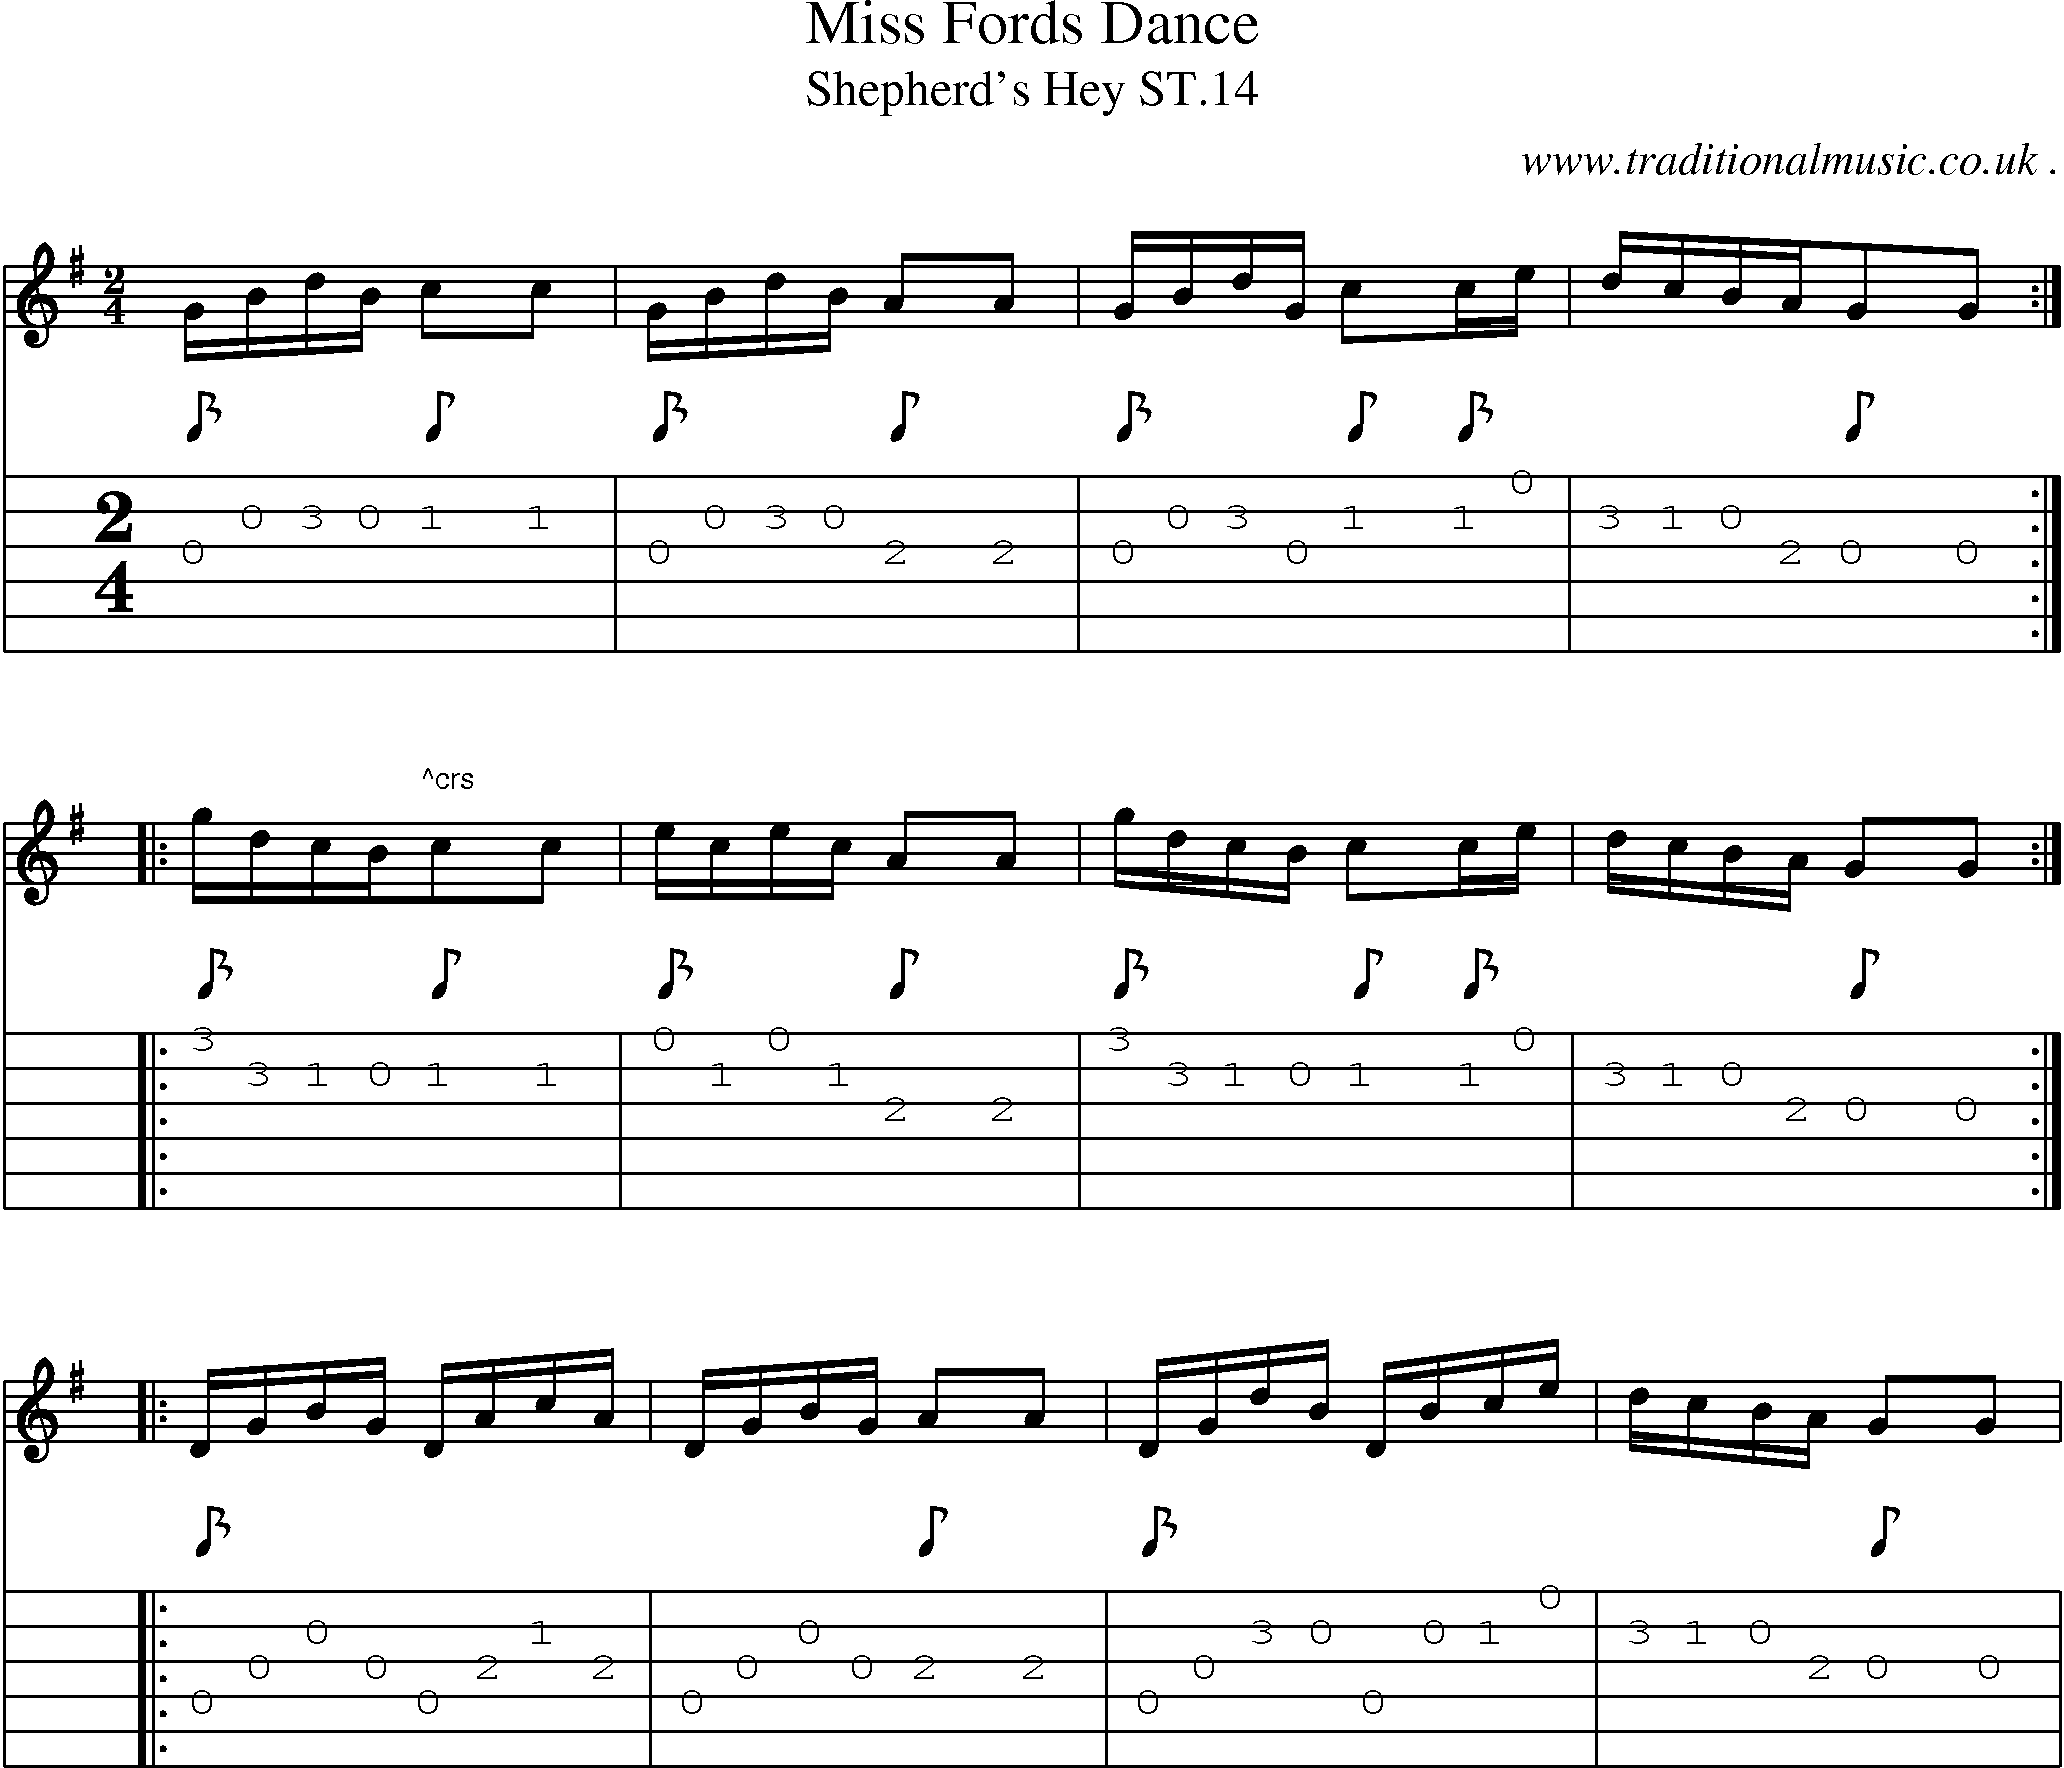 Sheet-Music and Guitar Tabs for Miss Fords Dance